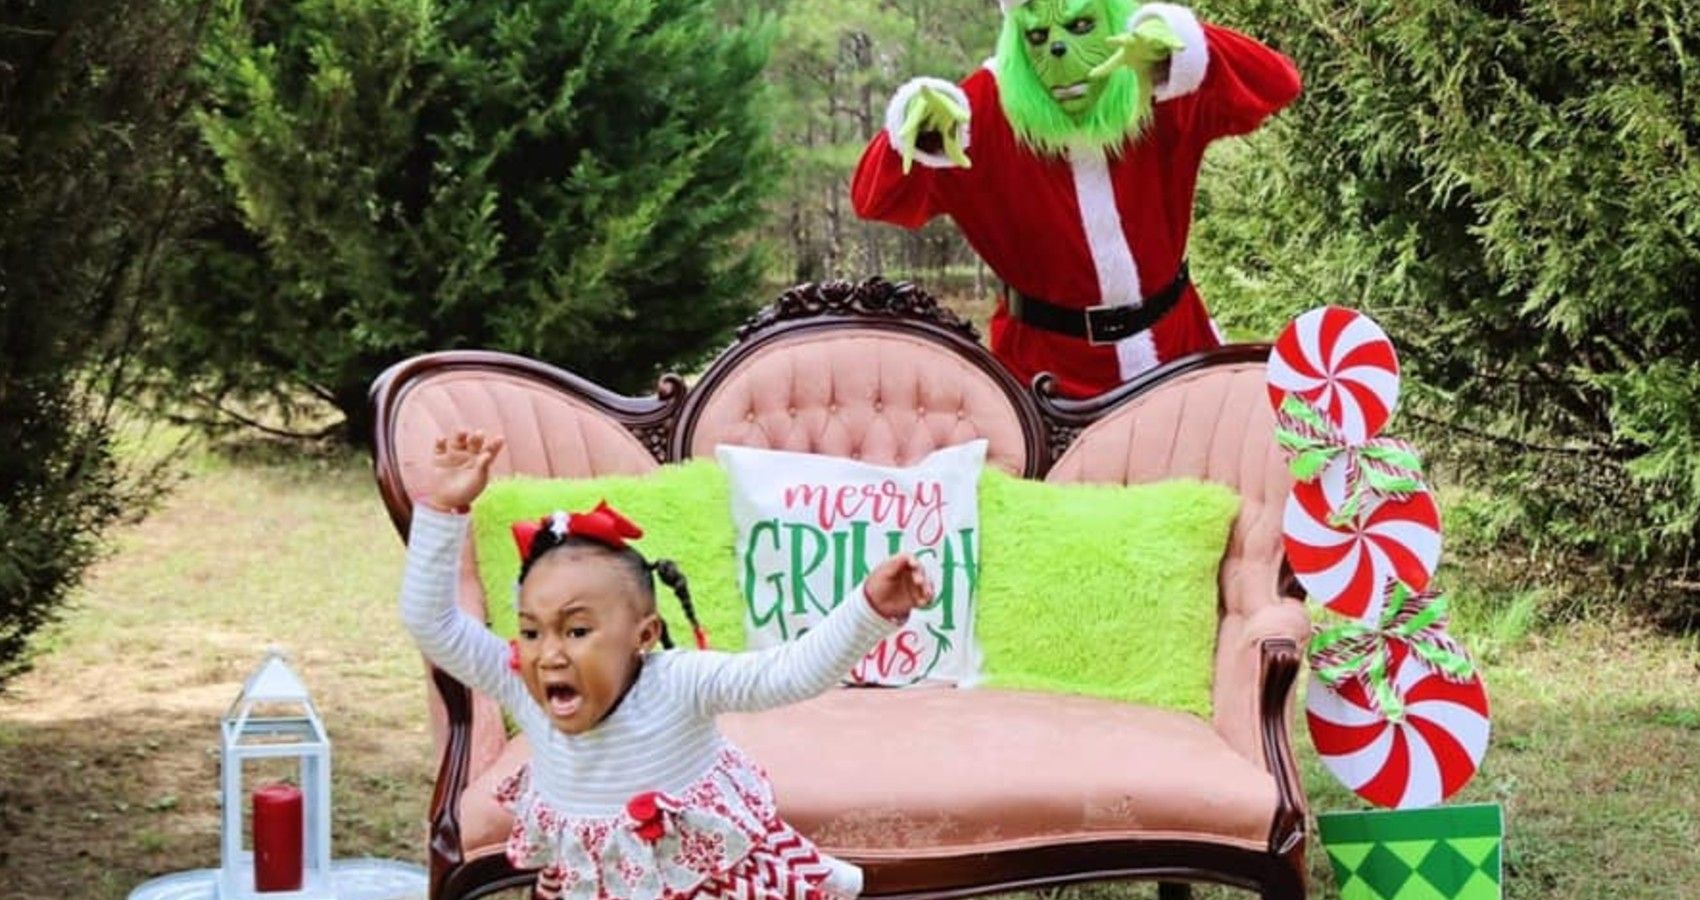 A little girl running from the grinch at a photoshoot